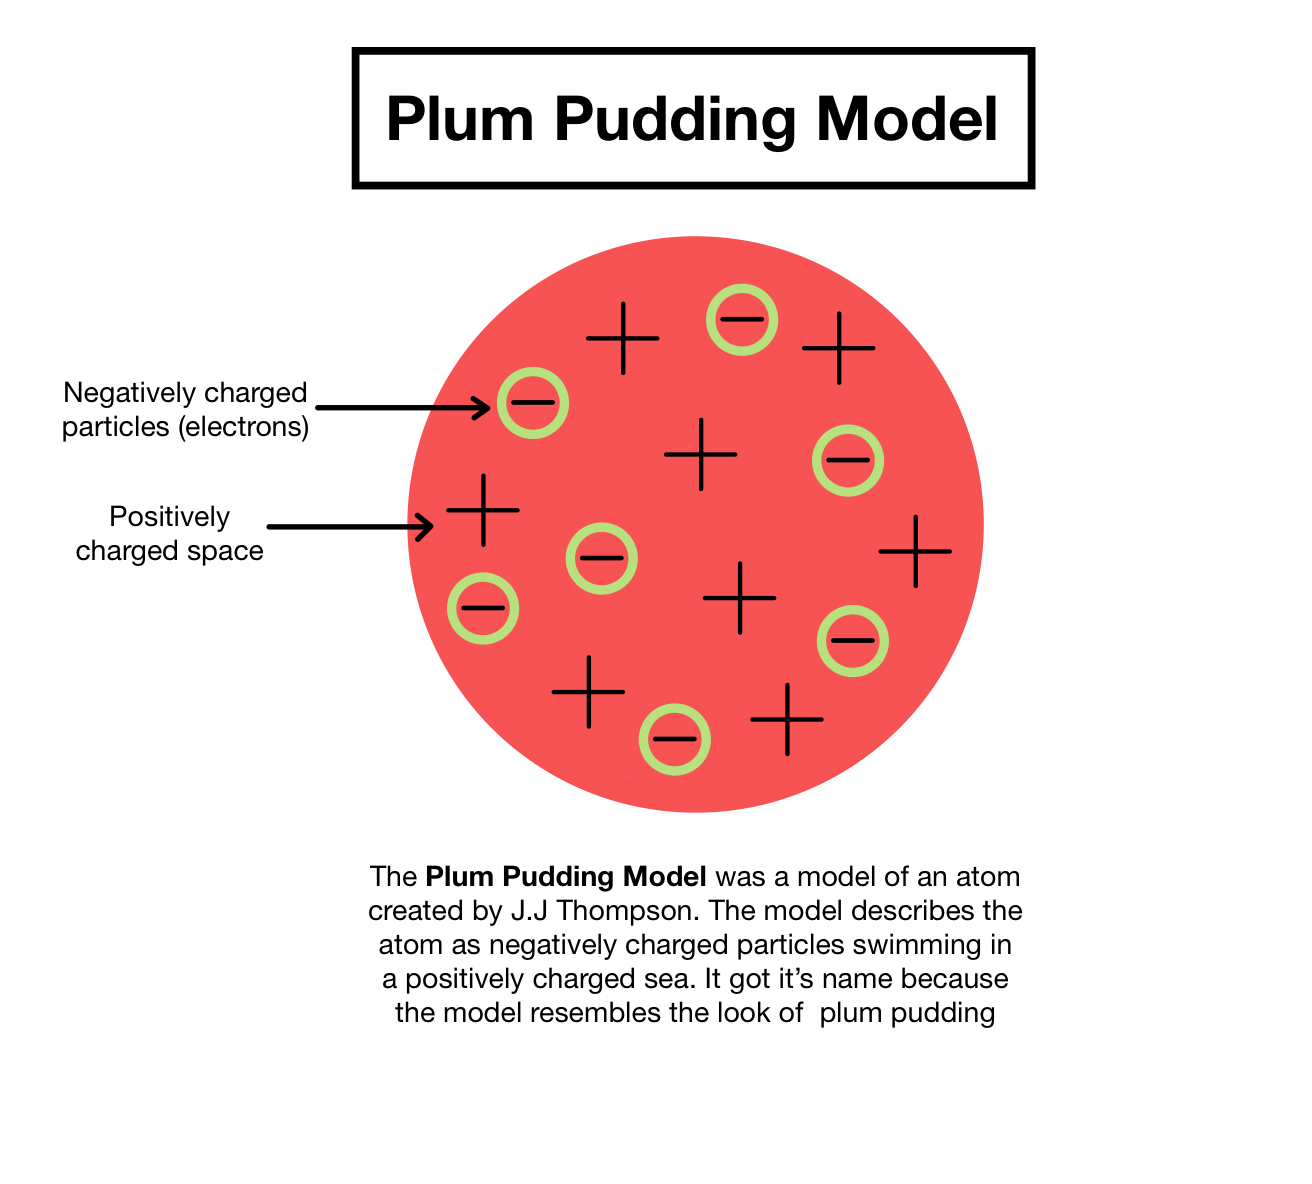 <p>Plum-pudding model. The + must exist to cancel the -, in order to create neutral atom. NO NUCLEUS IN THIS MODEL!</p>